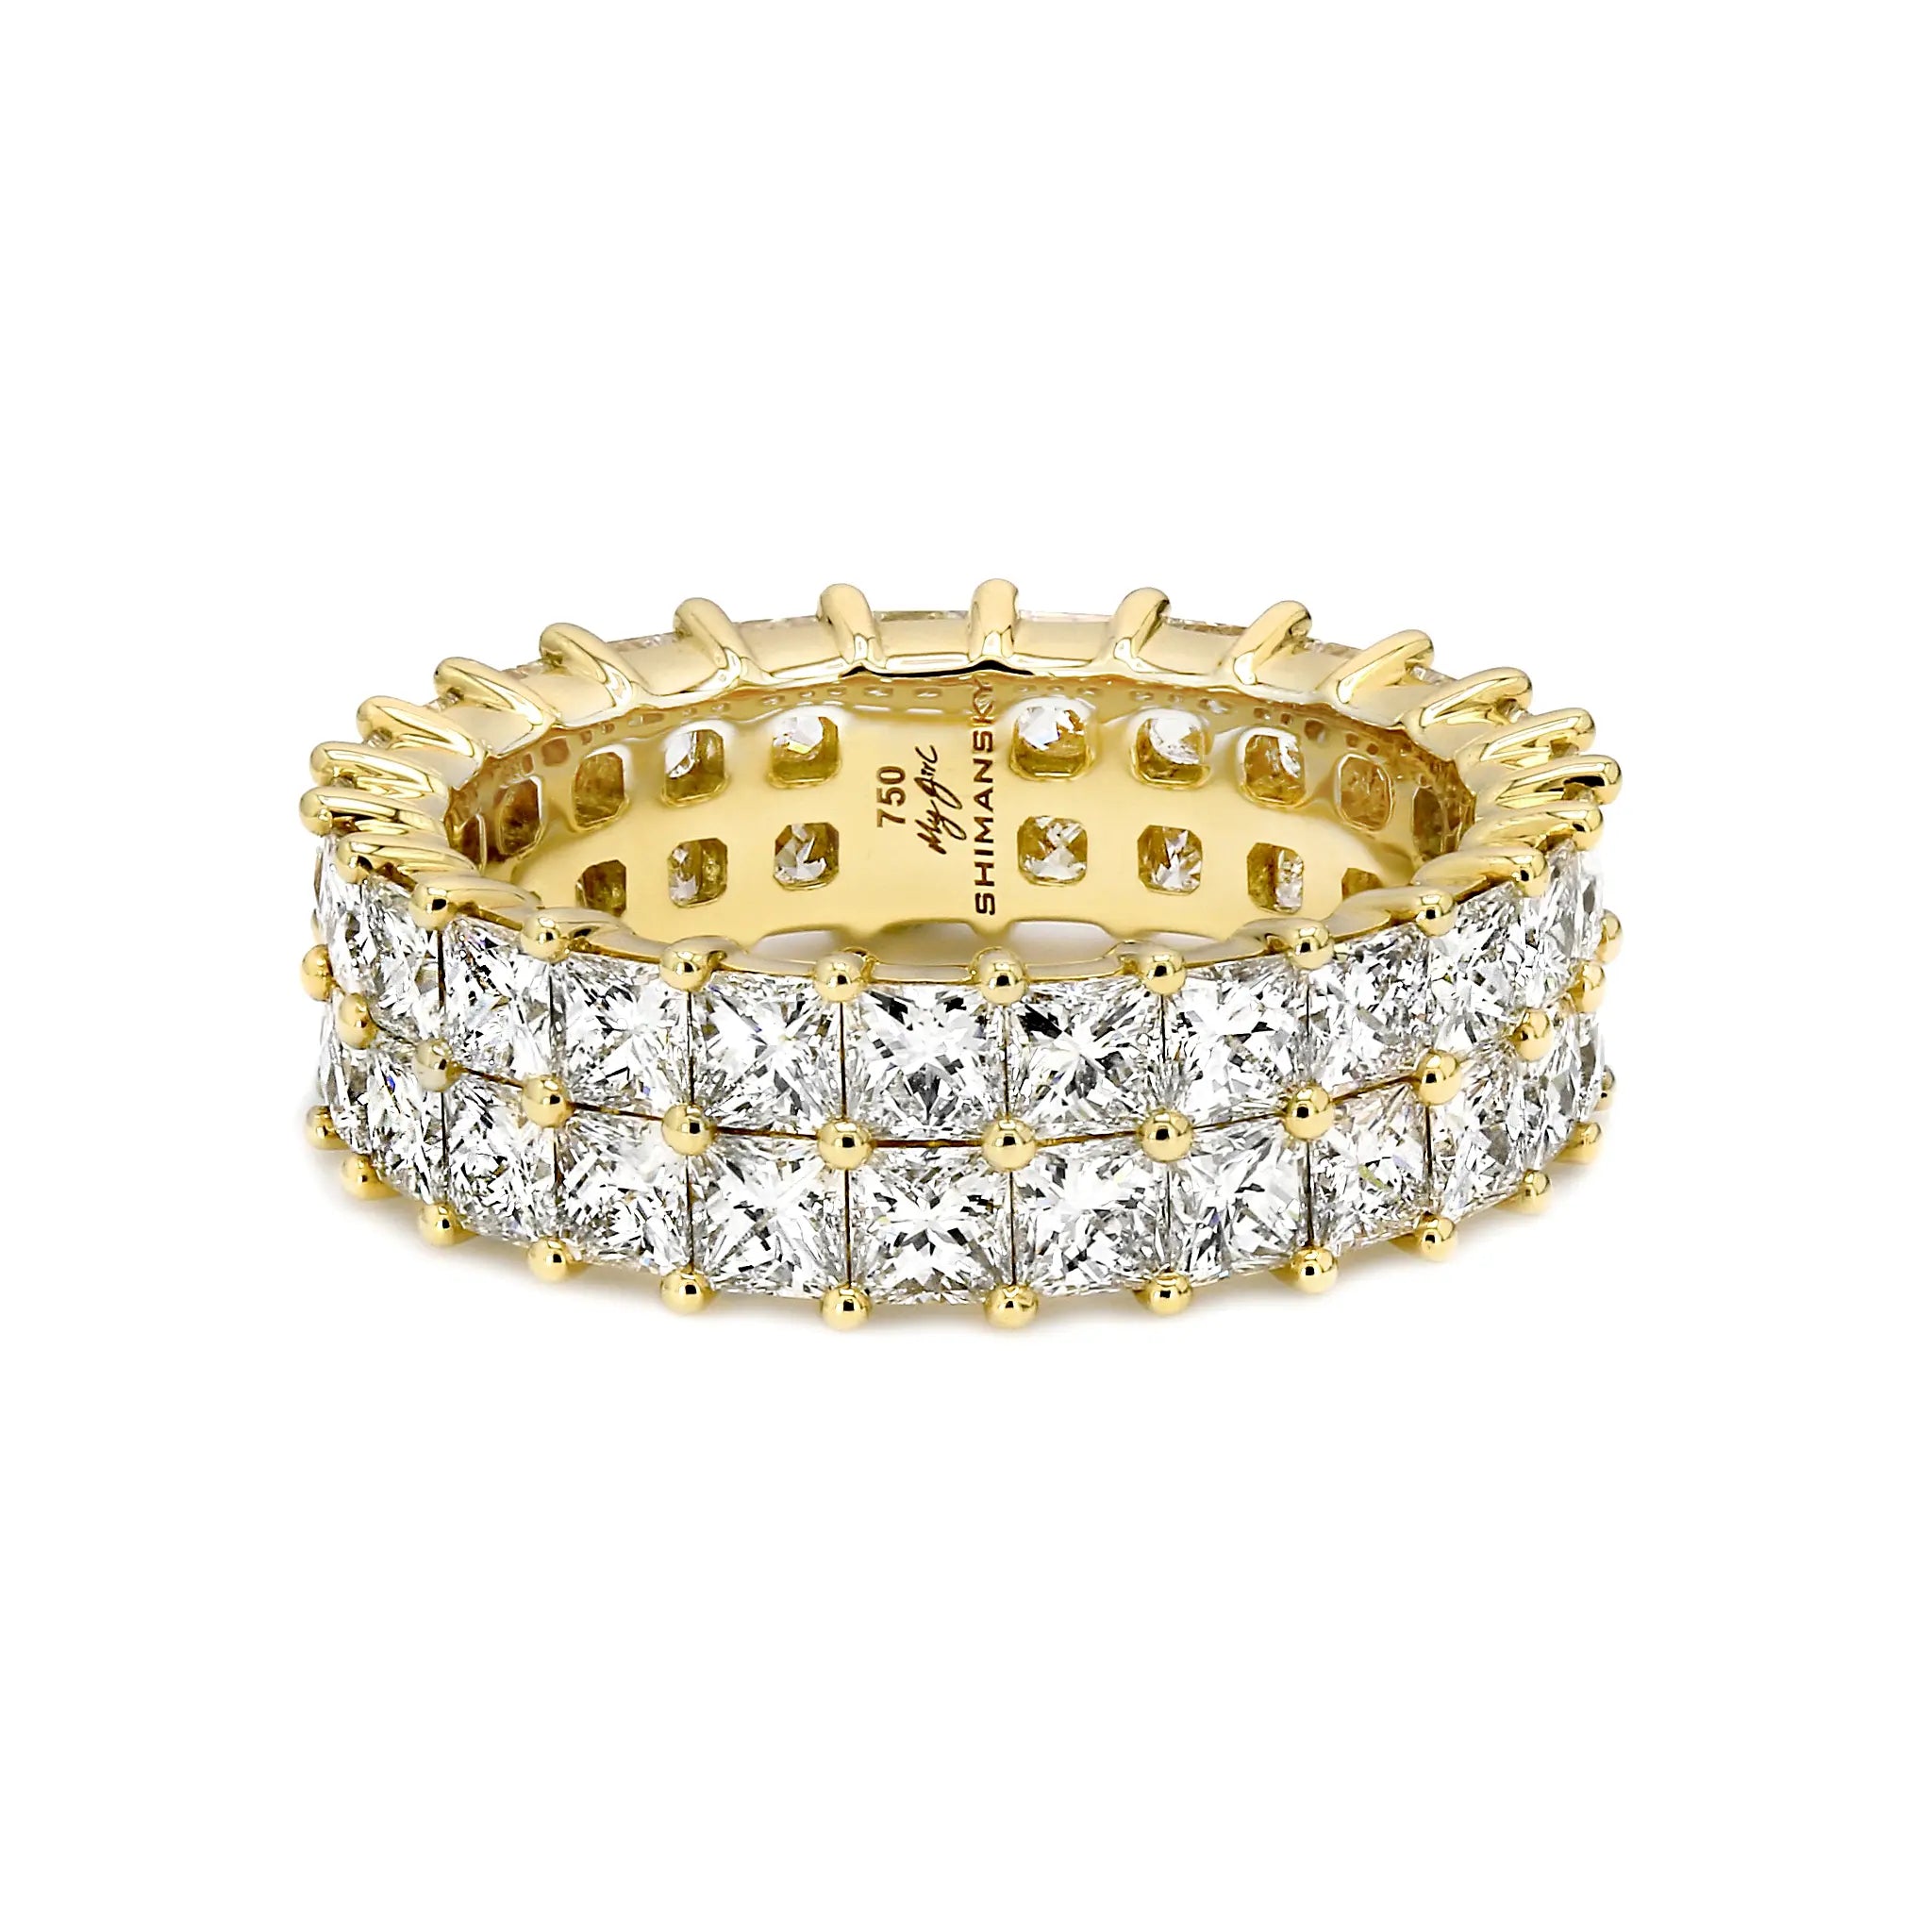 Shimansky - My Girl Claw set 2 Row Full Eternity Diamond Ring 4.20ct Crafted in 18K Yellow Gold